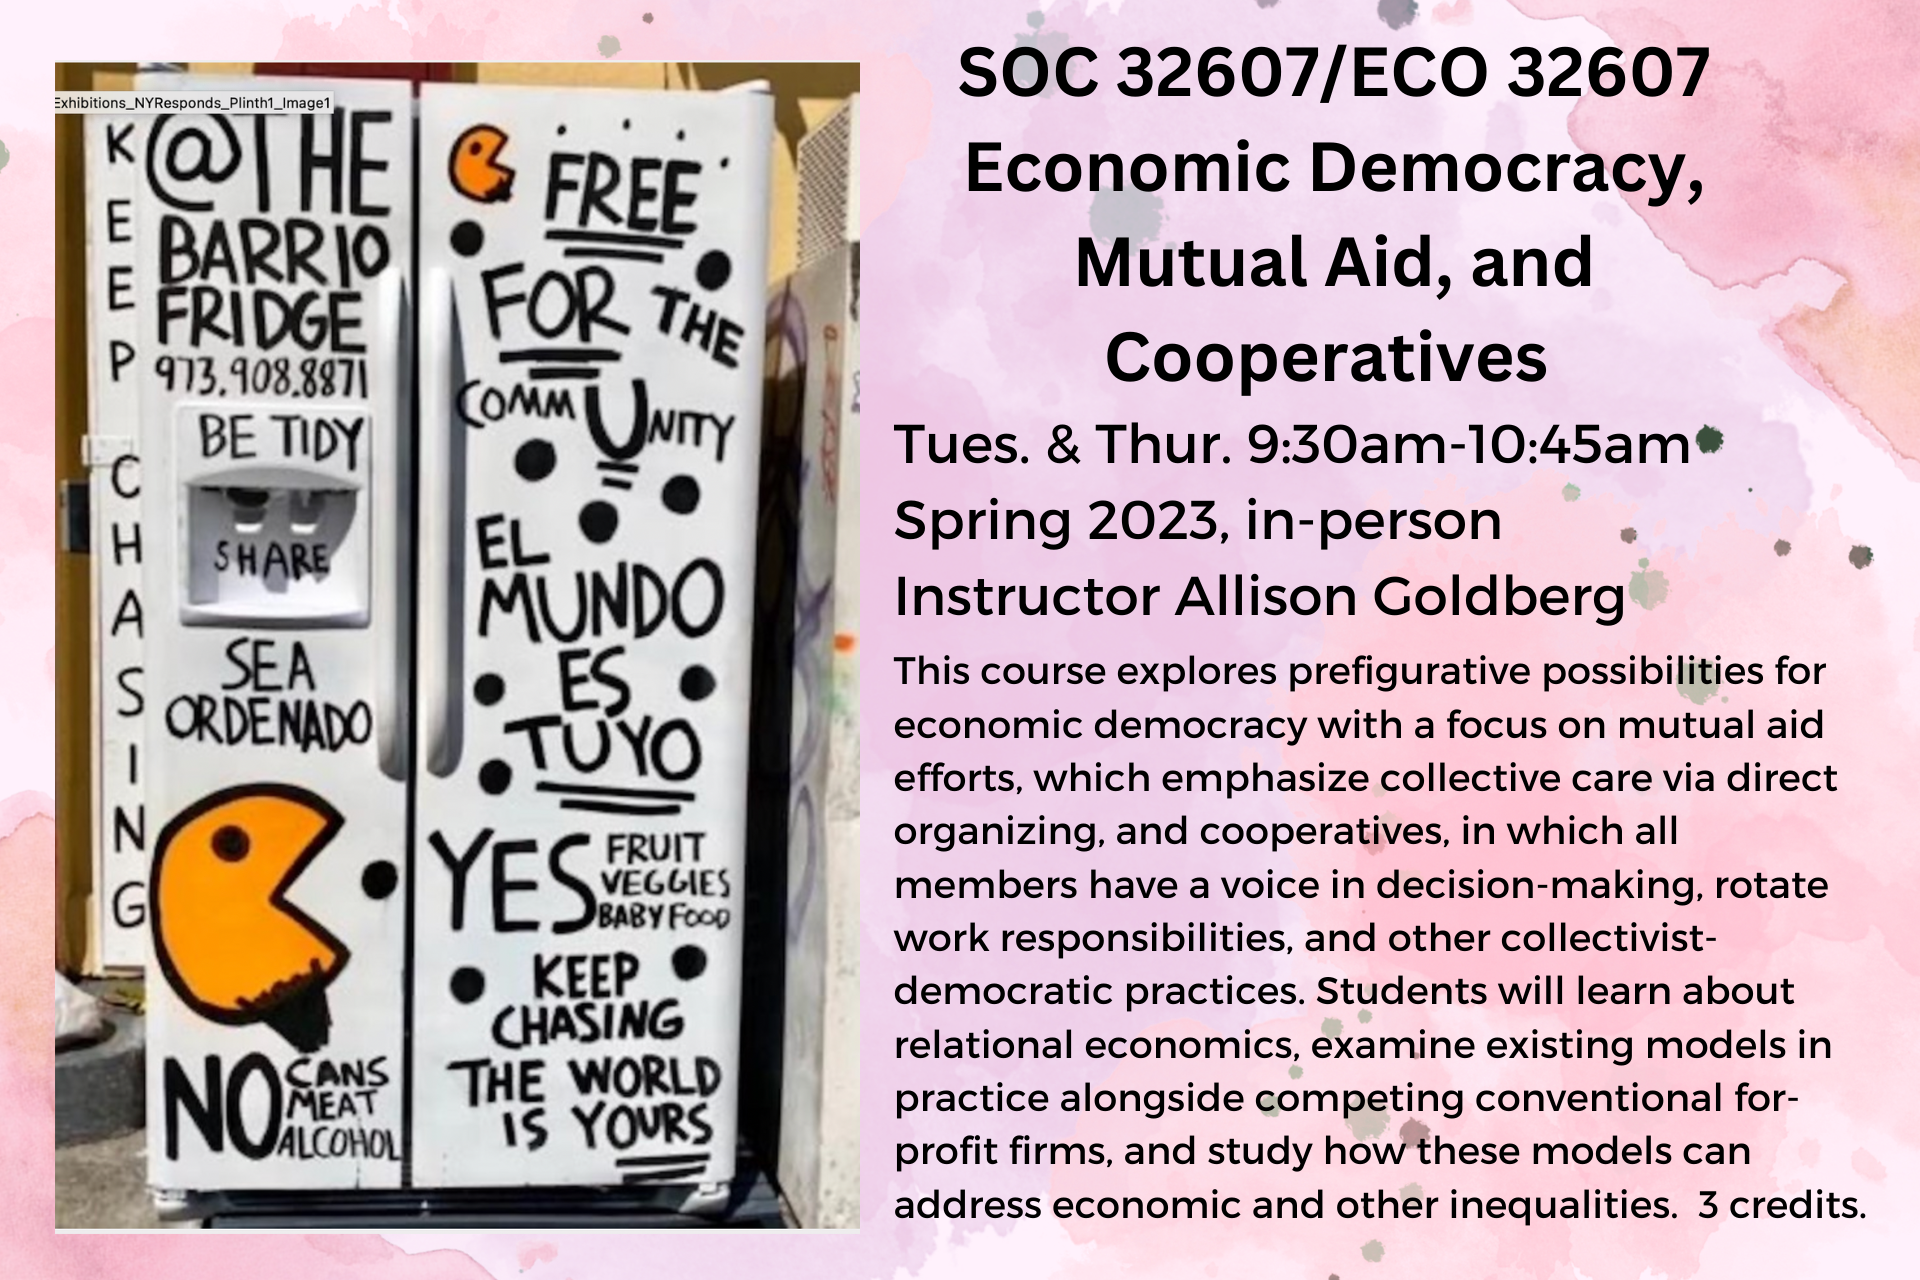 Colin Powell School CCNY Sociology Economic Democracy, Mutual Aid, and Cooperatives Spring 2023 Course